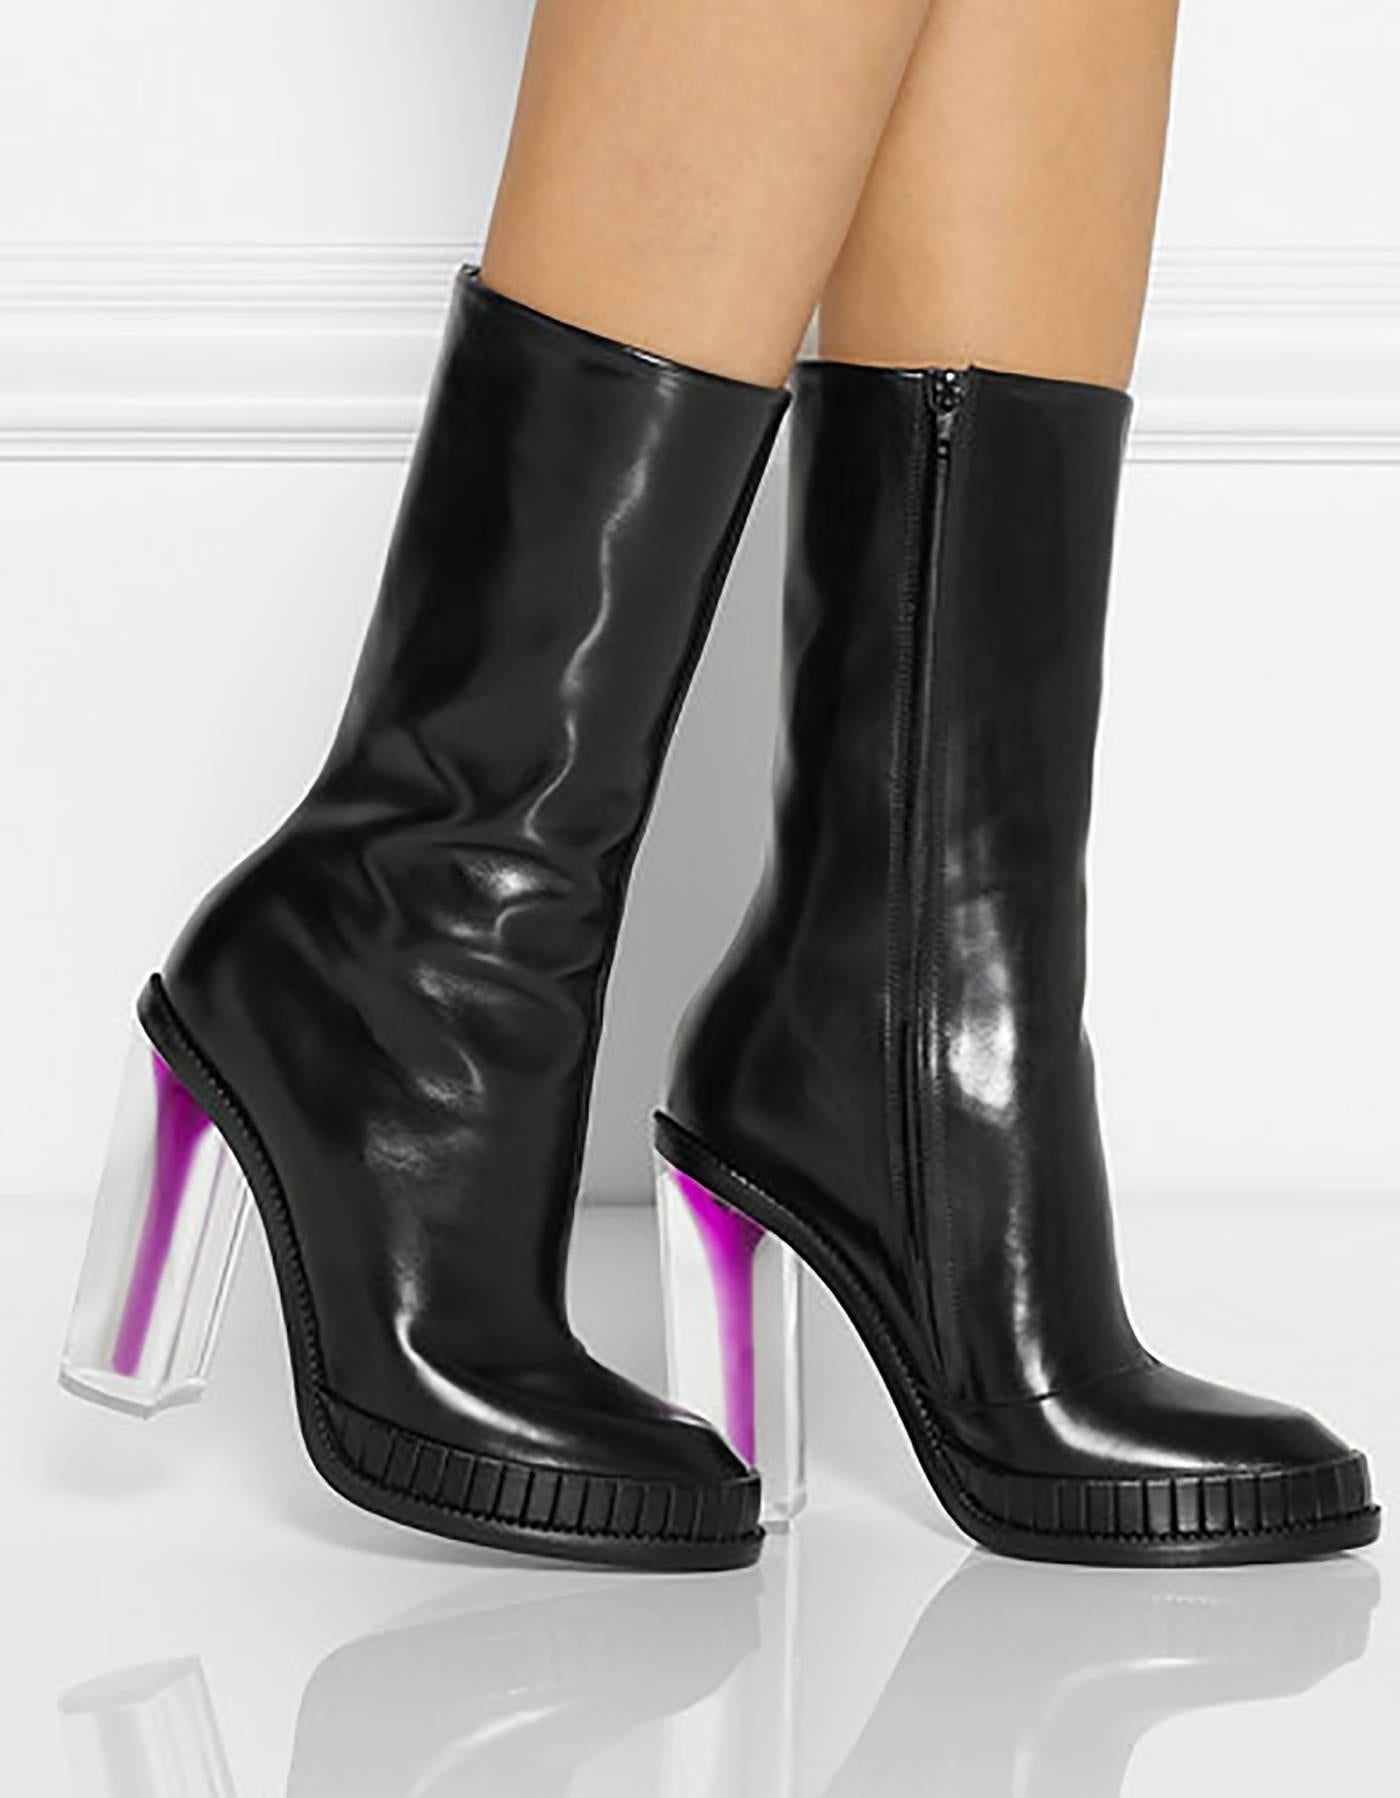 Maison Martin Margiela Black Leather & Shaded Plexiglass Boots Sz 39

Features a shaded purple stilleto heel illusion in chunky plexiglass heel

Made In: Italy
Color: Black
Materials: Leather, plexiglass
Closure/Opening: Side zip closure
Sole Stamp: